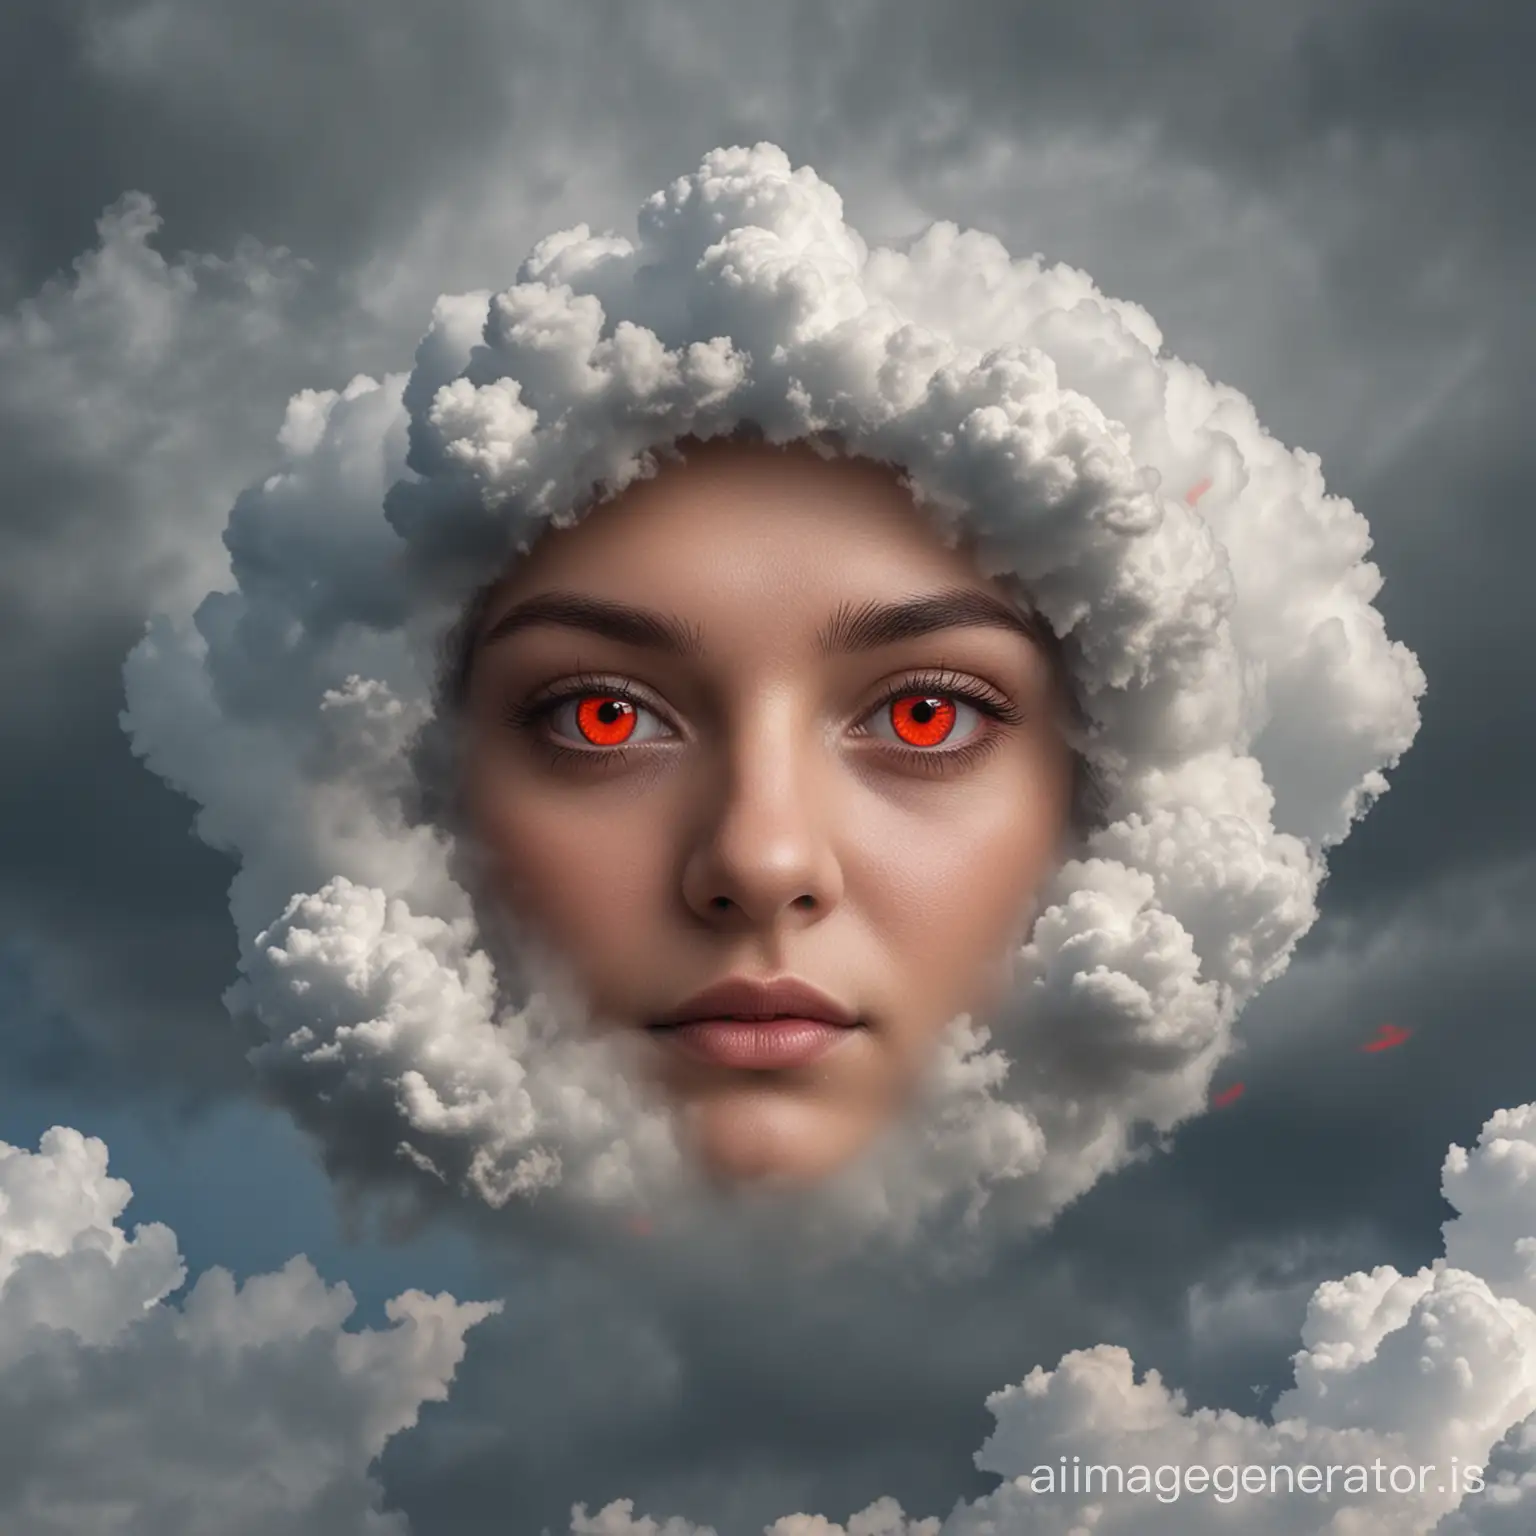 Intense-Expression-Face-with-Red-Eyes-in-Cloud